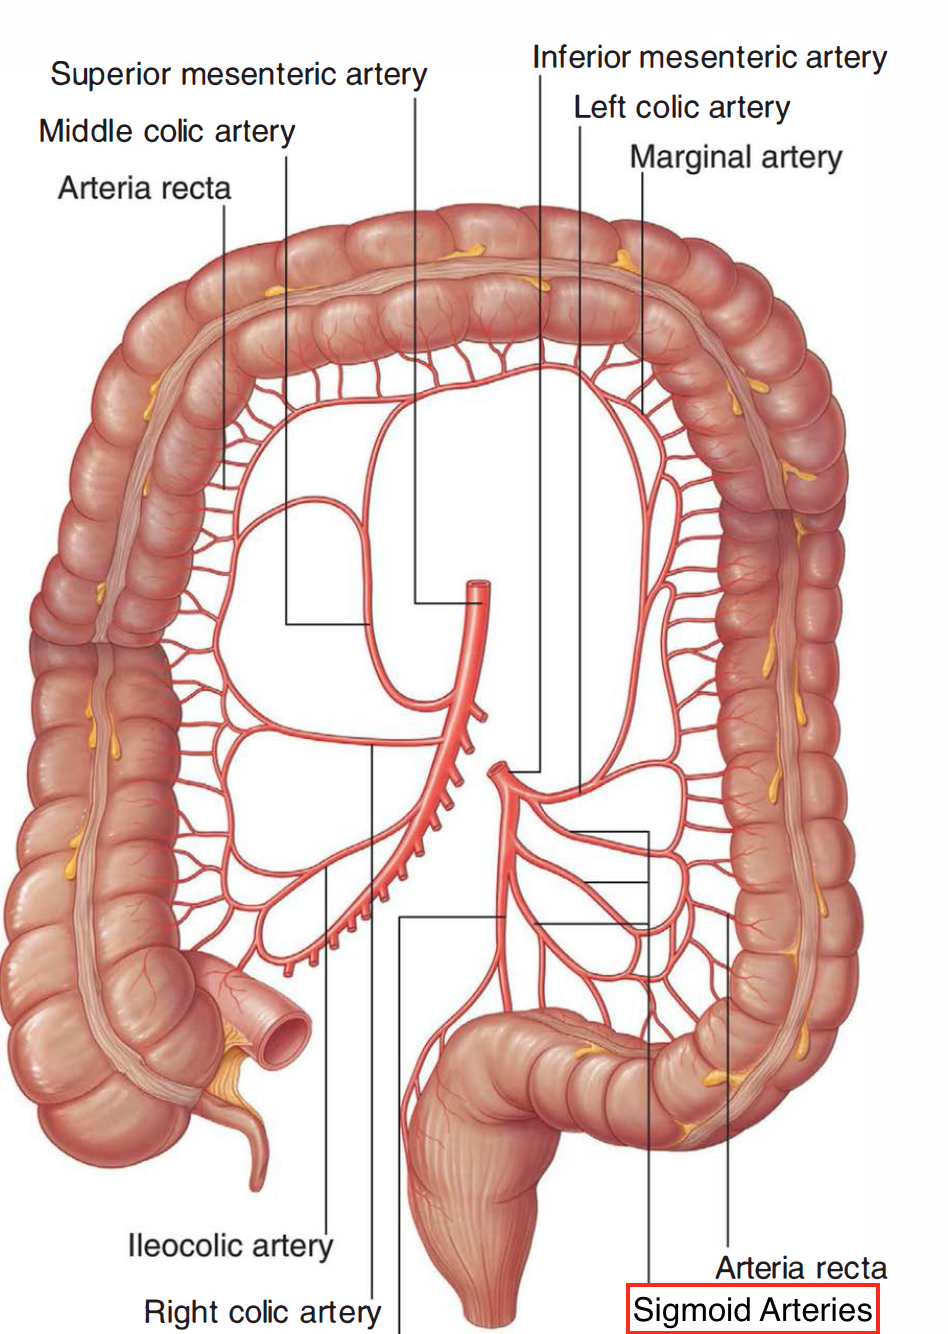 Anatomical location of the sigmoid arteries (source)